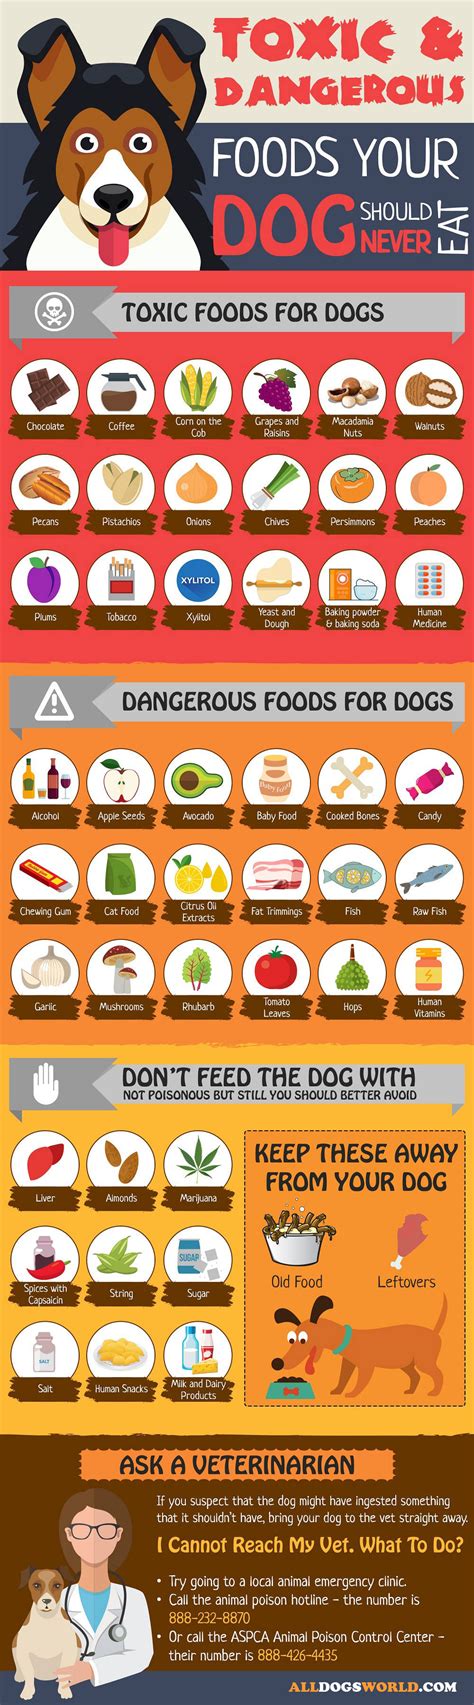 What foods do most dogs hate?